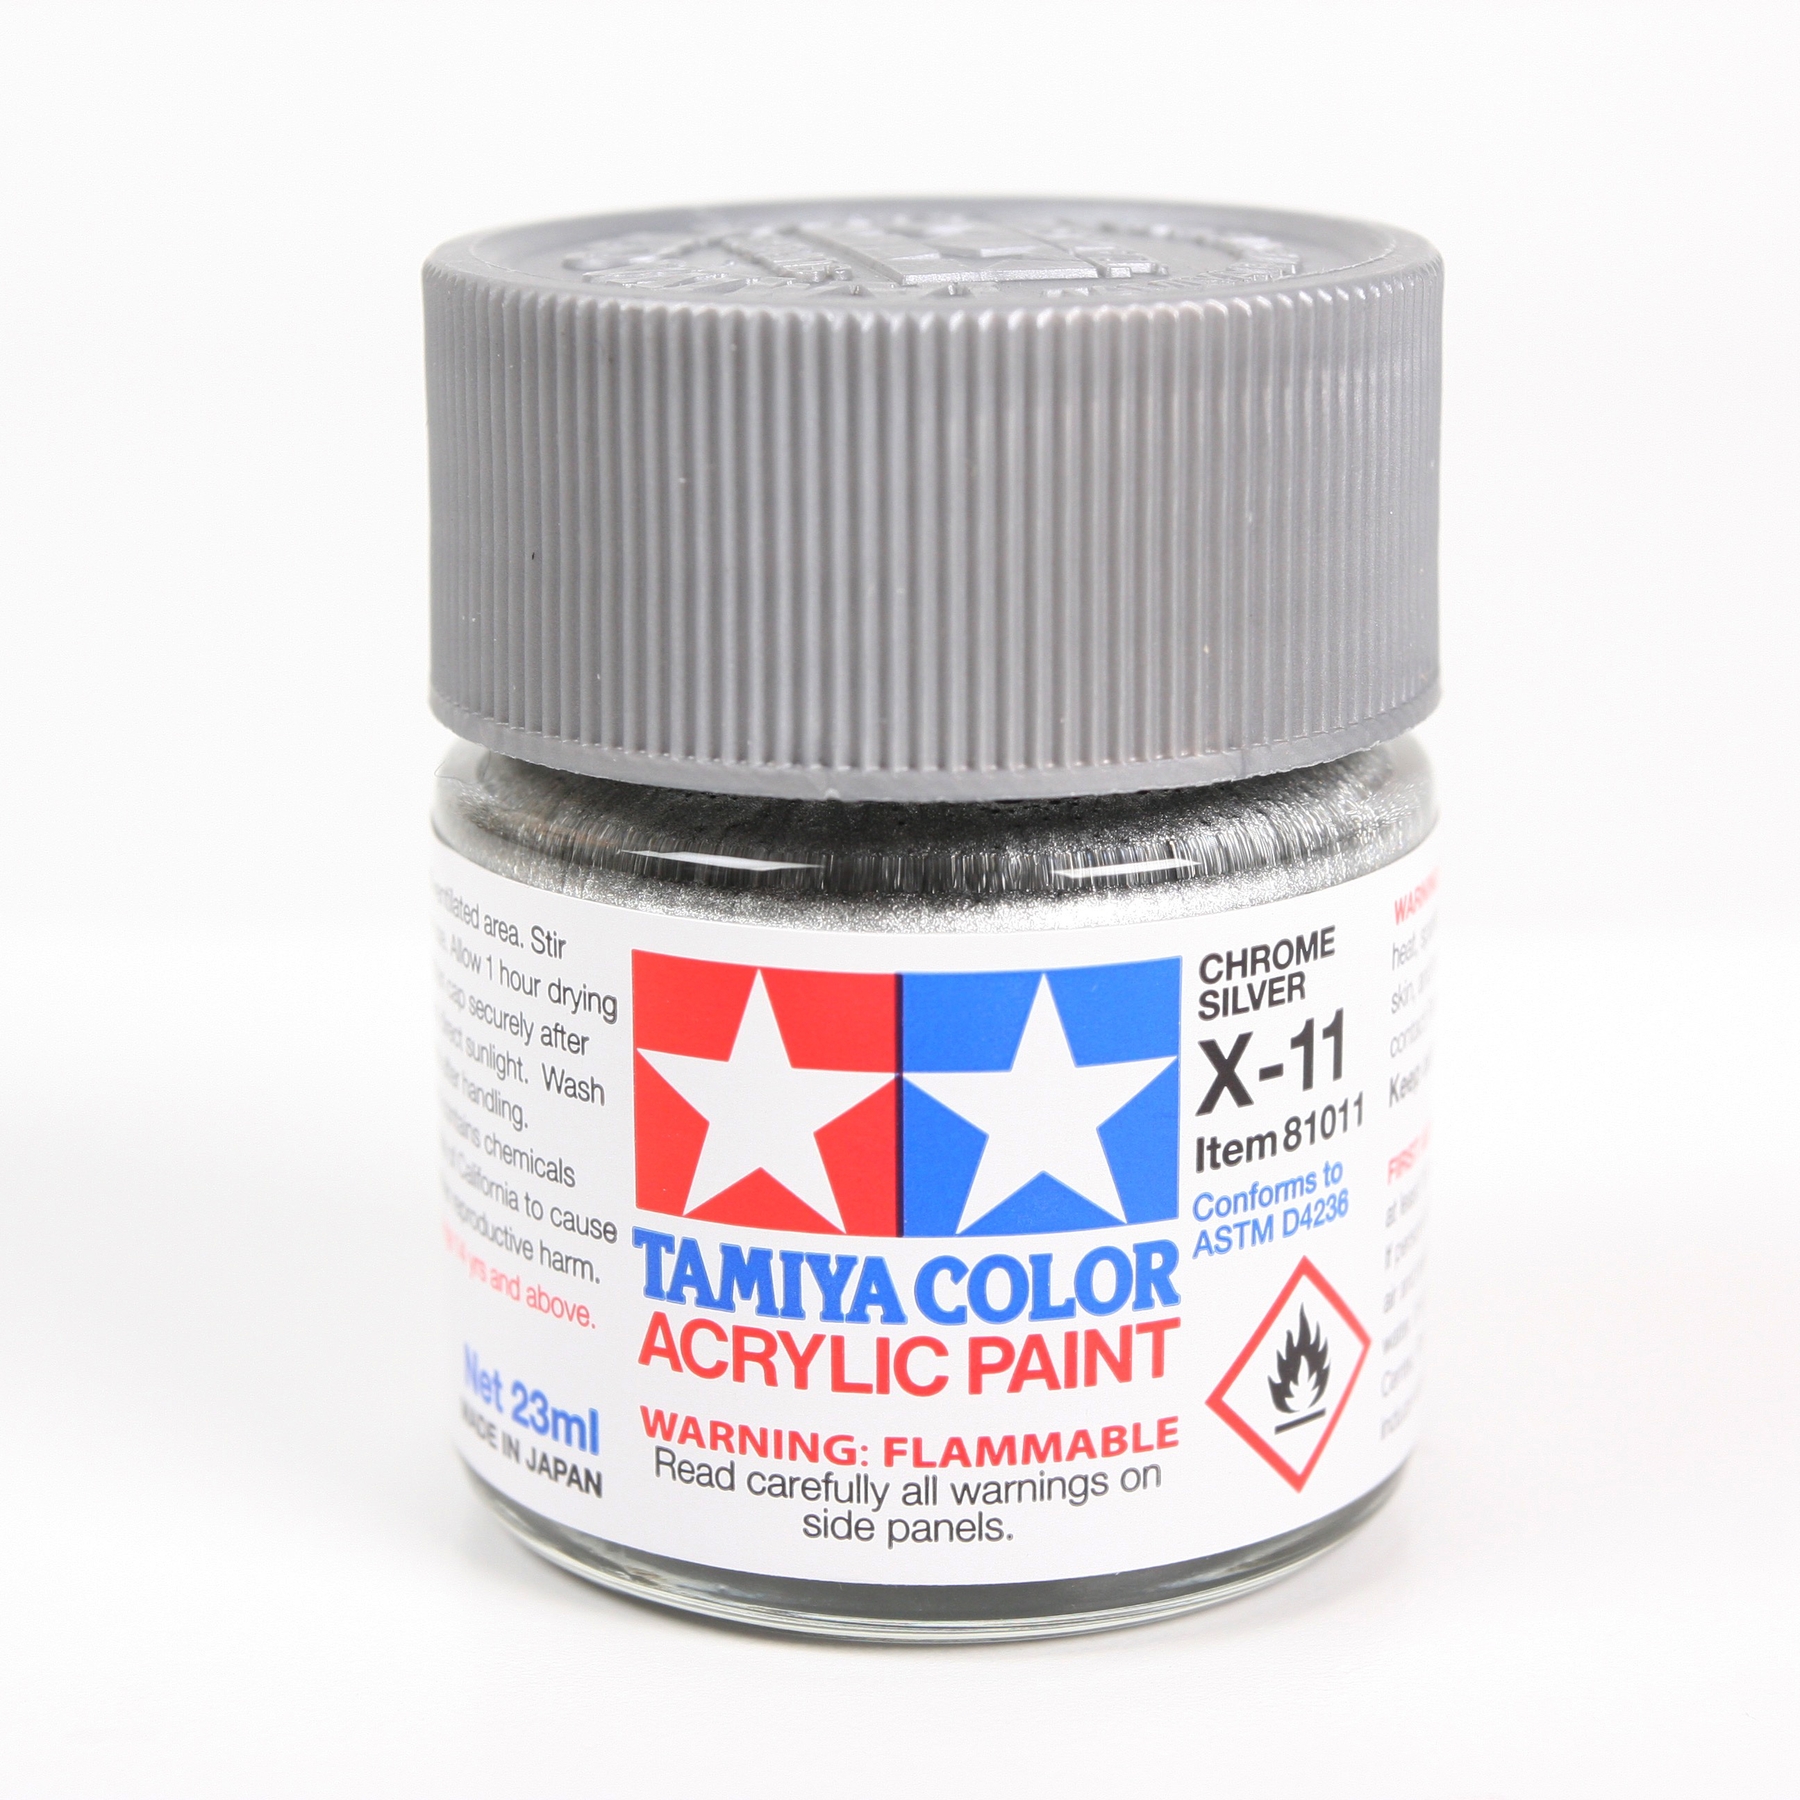 Get pro body painting results using Tamiya paint and accessories